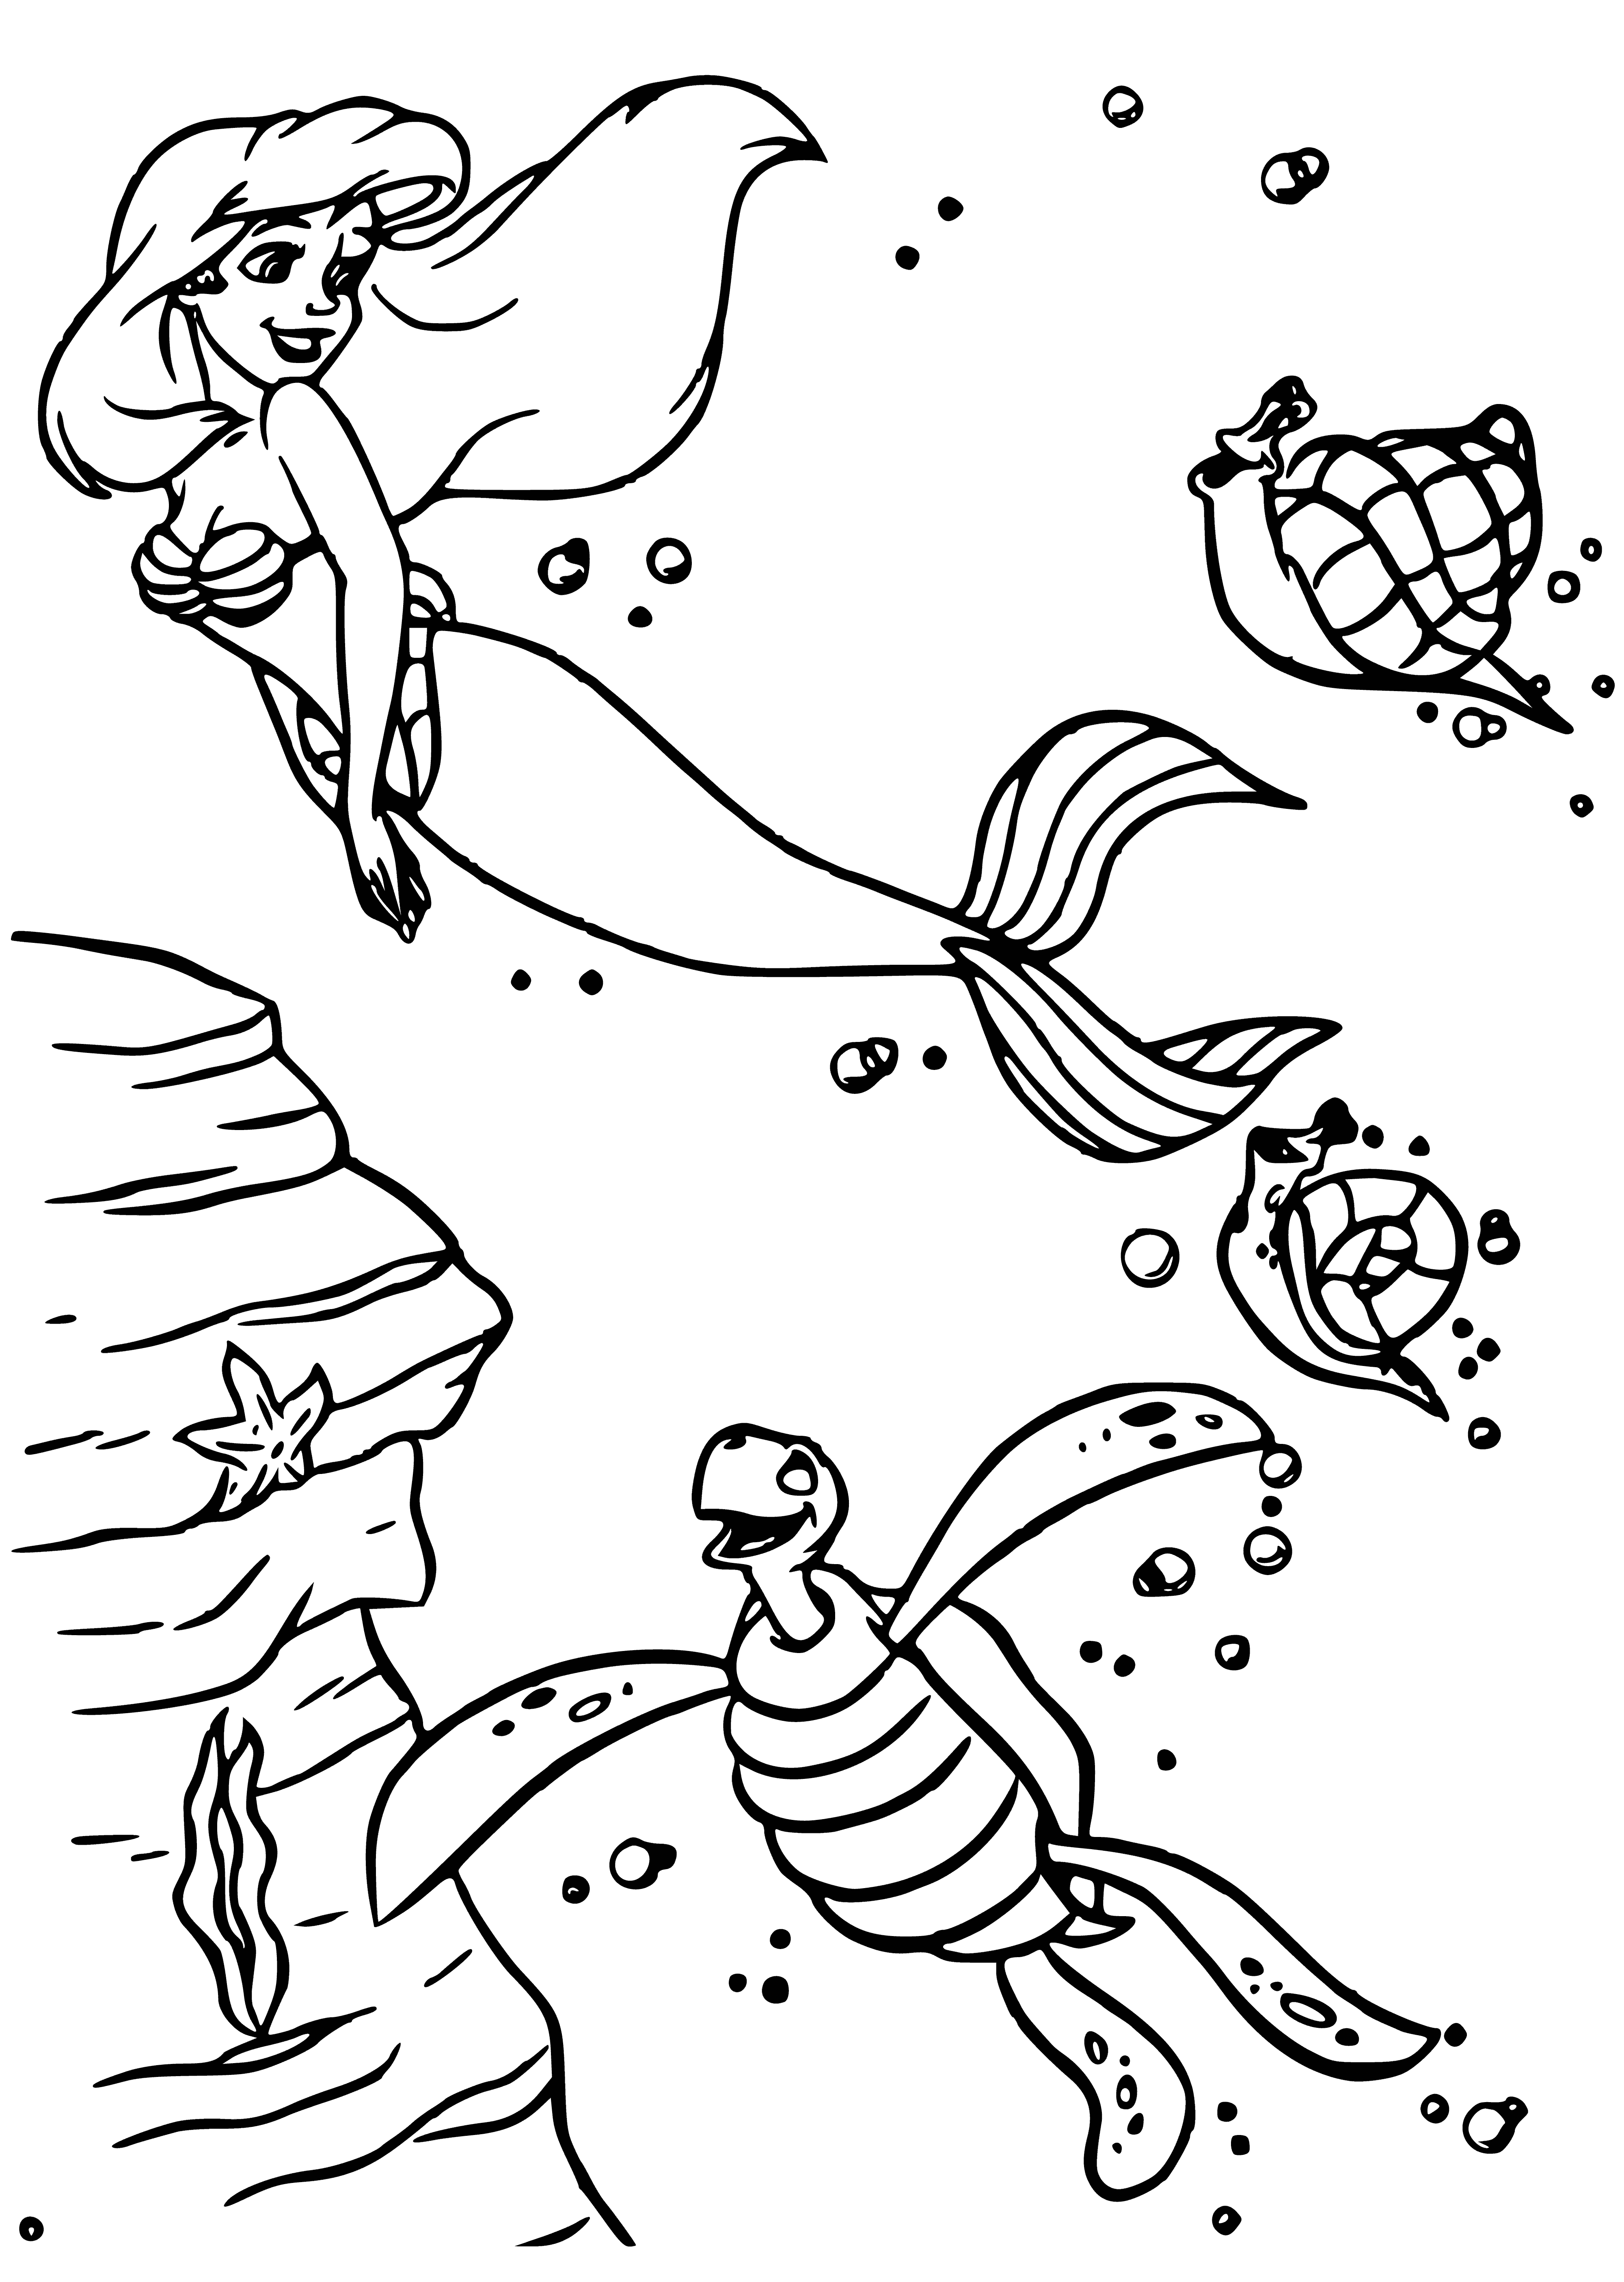 coloring page: Ariel & Turtle share a meal and offer support in their underwater kingdom. The Turtle uses its shell to help collect food and the two friends are content in each other's company. #Fairytale